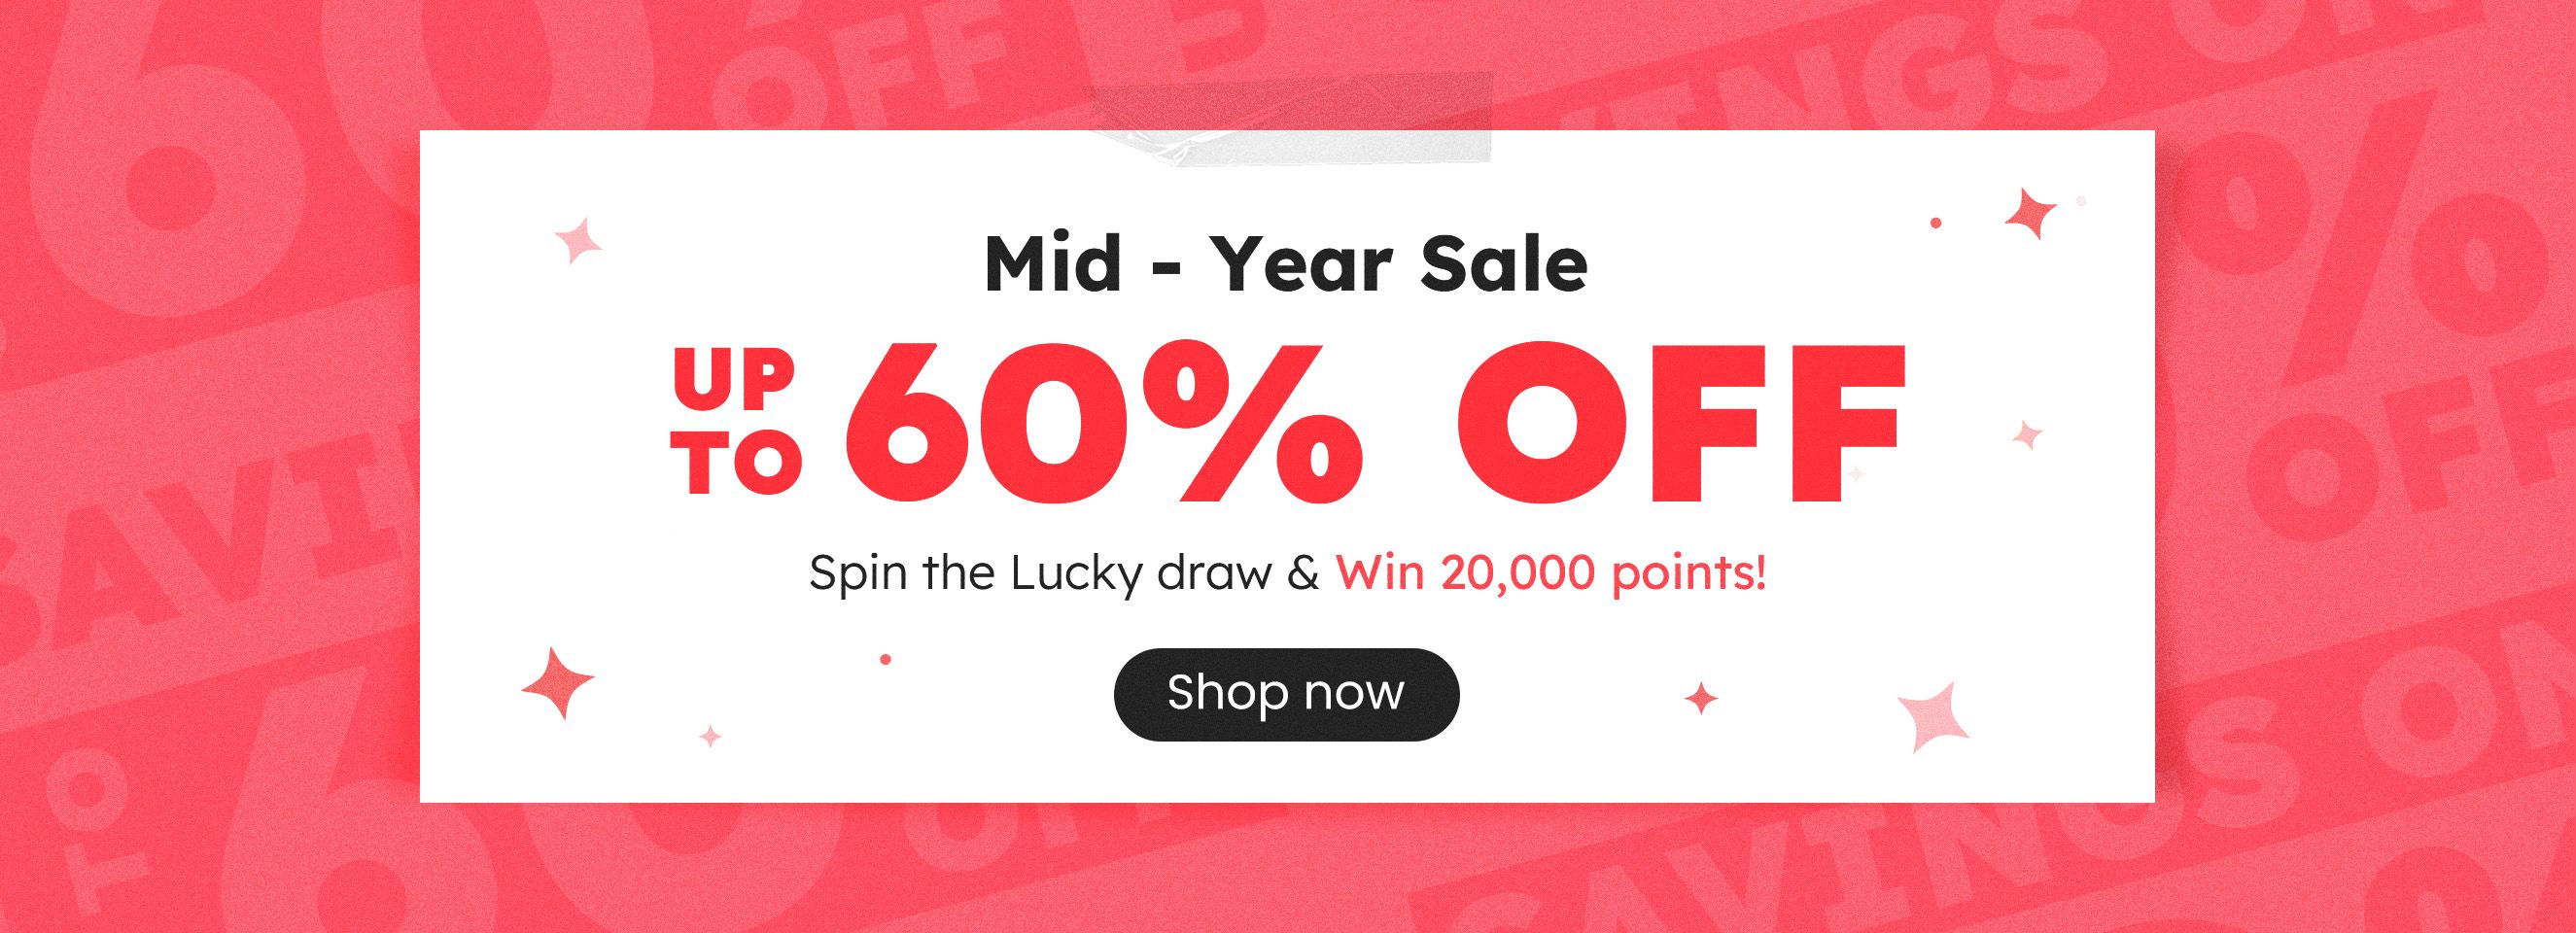 Click it to join Mid-Year Sale activity